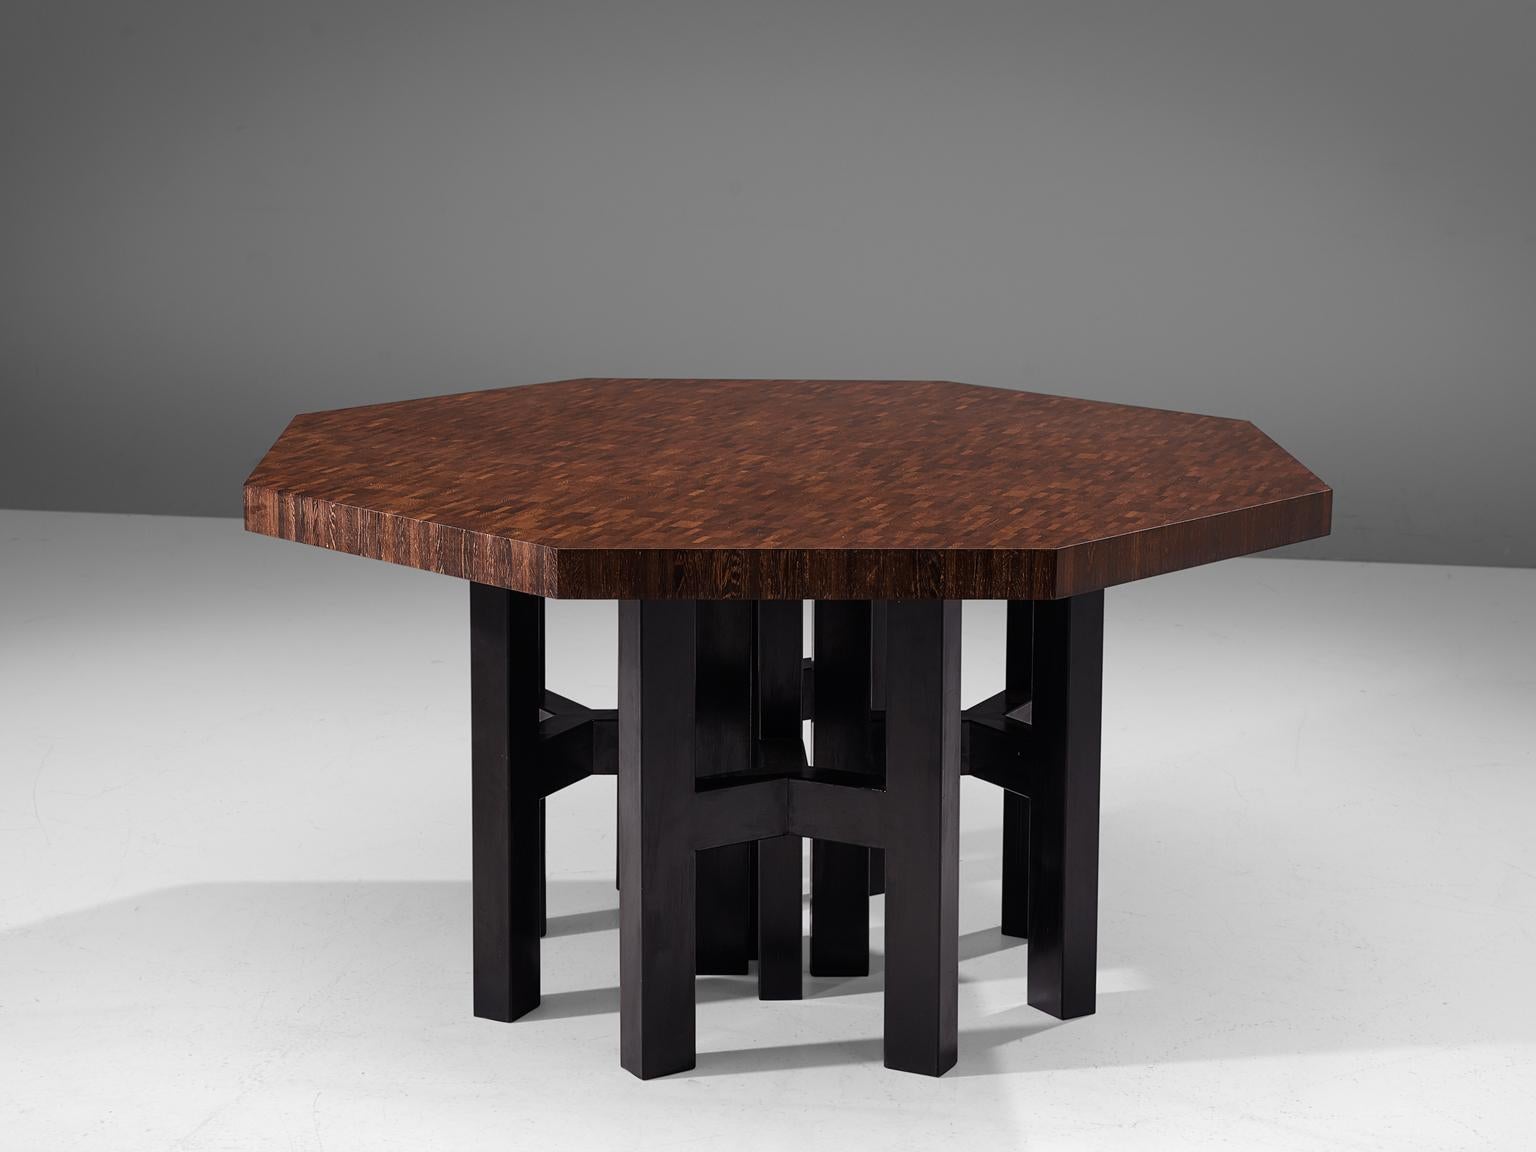 Jan Vlug for Bergwood, center table wengé and metal, Belgium, 1970s

Rare and exclusive dining table with a characteristic graphical base and stunning executed tabletop. The table is made by Belgian designer Jan Vlug, who was a close friend of